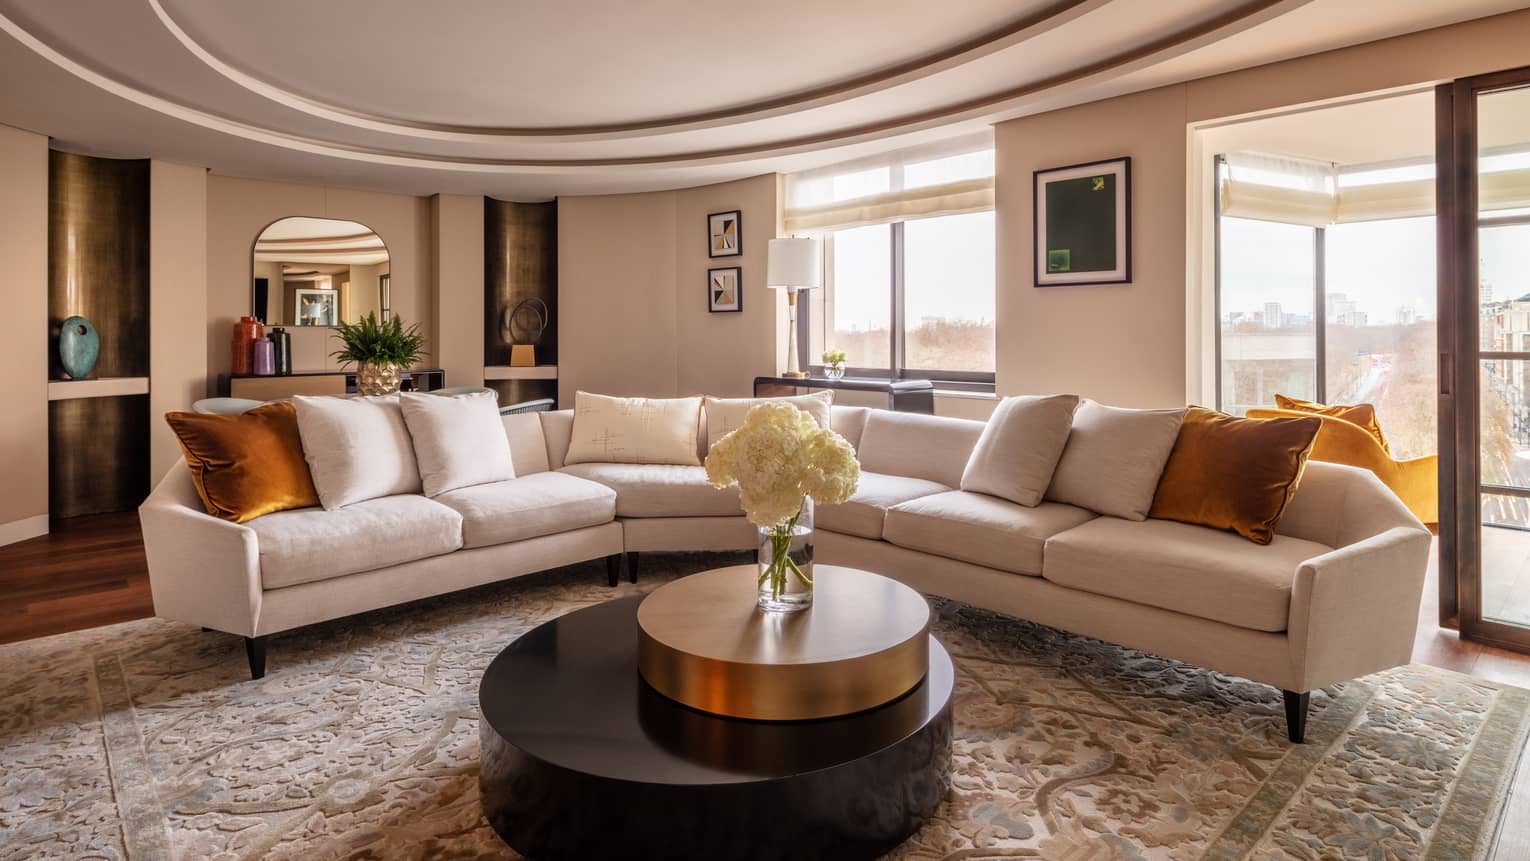 The Hyde Park Suite at Four Seasons London Park Lane in Mayfair showcases a sophisticated living room with a panoramic view of the city. The room features a long, sleek white sofas with orange throw pillows, arranged around a large circular black coffee table with a gold rim. The area is adorned with a luxurious beige patterned rug, adding texture and warmth. Artworks hang on the walls, and a large window frames the stunning view outside, providing ample natural light. The decor is elegantly completed with a neutral colour palette and modern furnishings, creating an inviting and stylish space.